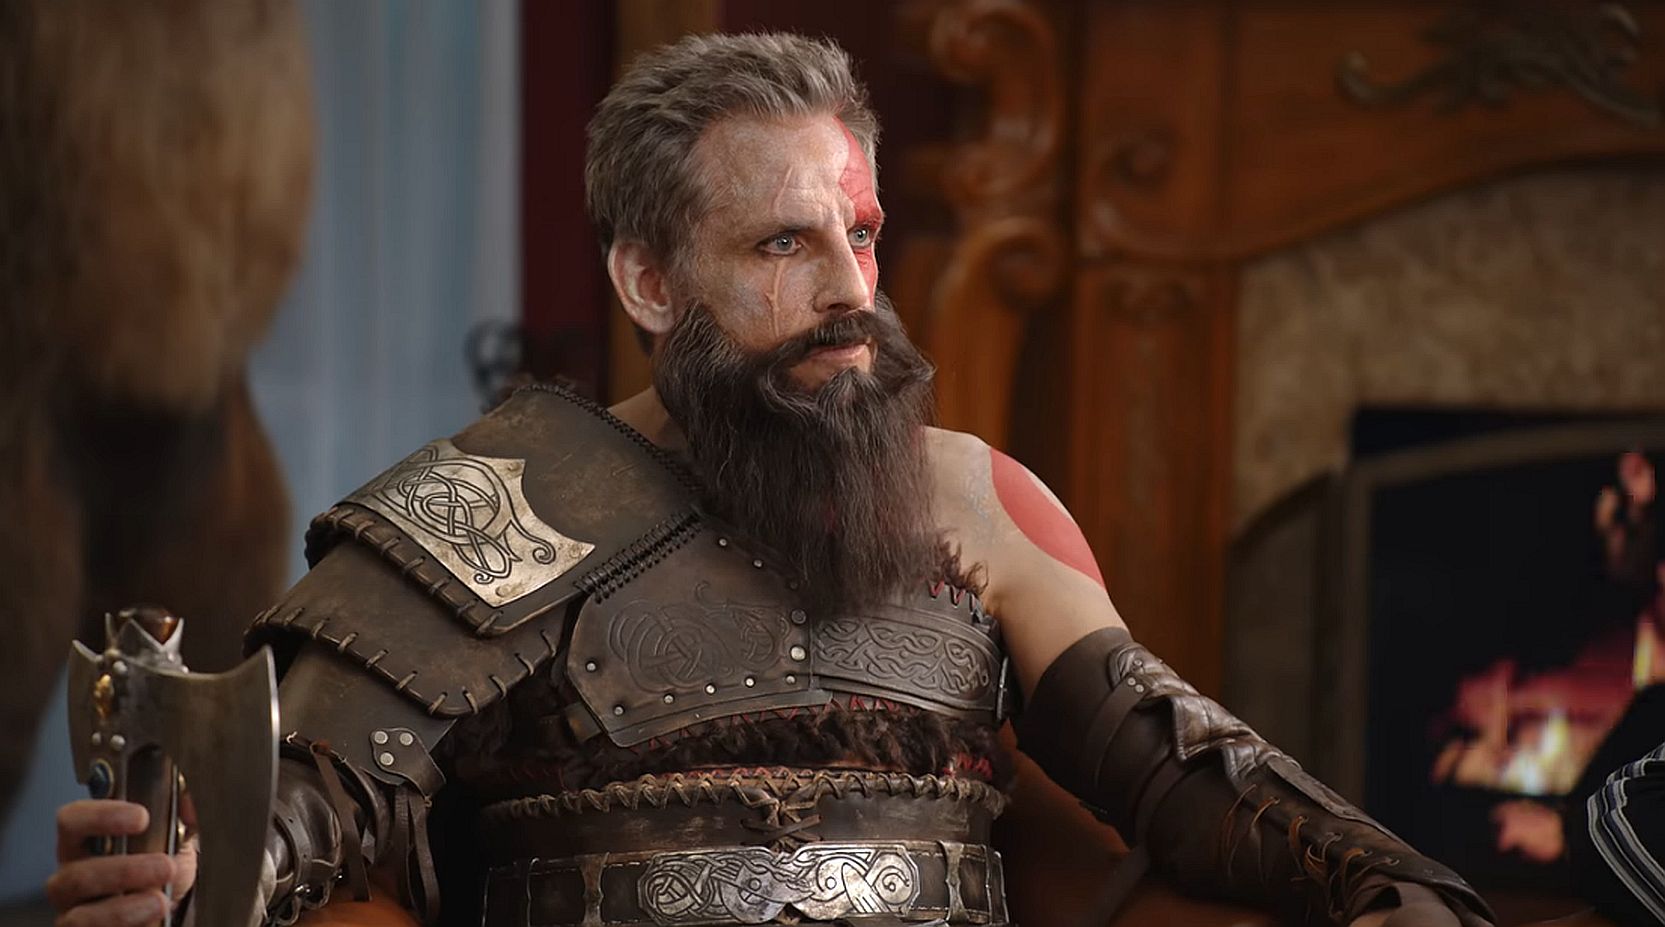 Image for God of War sells over 23 million copies while sequel Ragnarok gets an interesting commercial